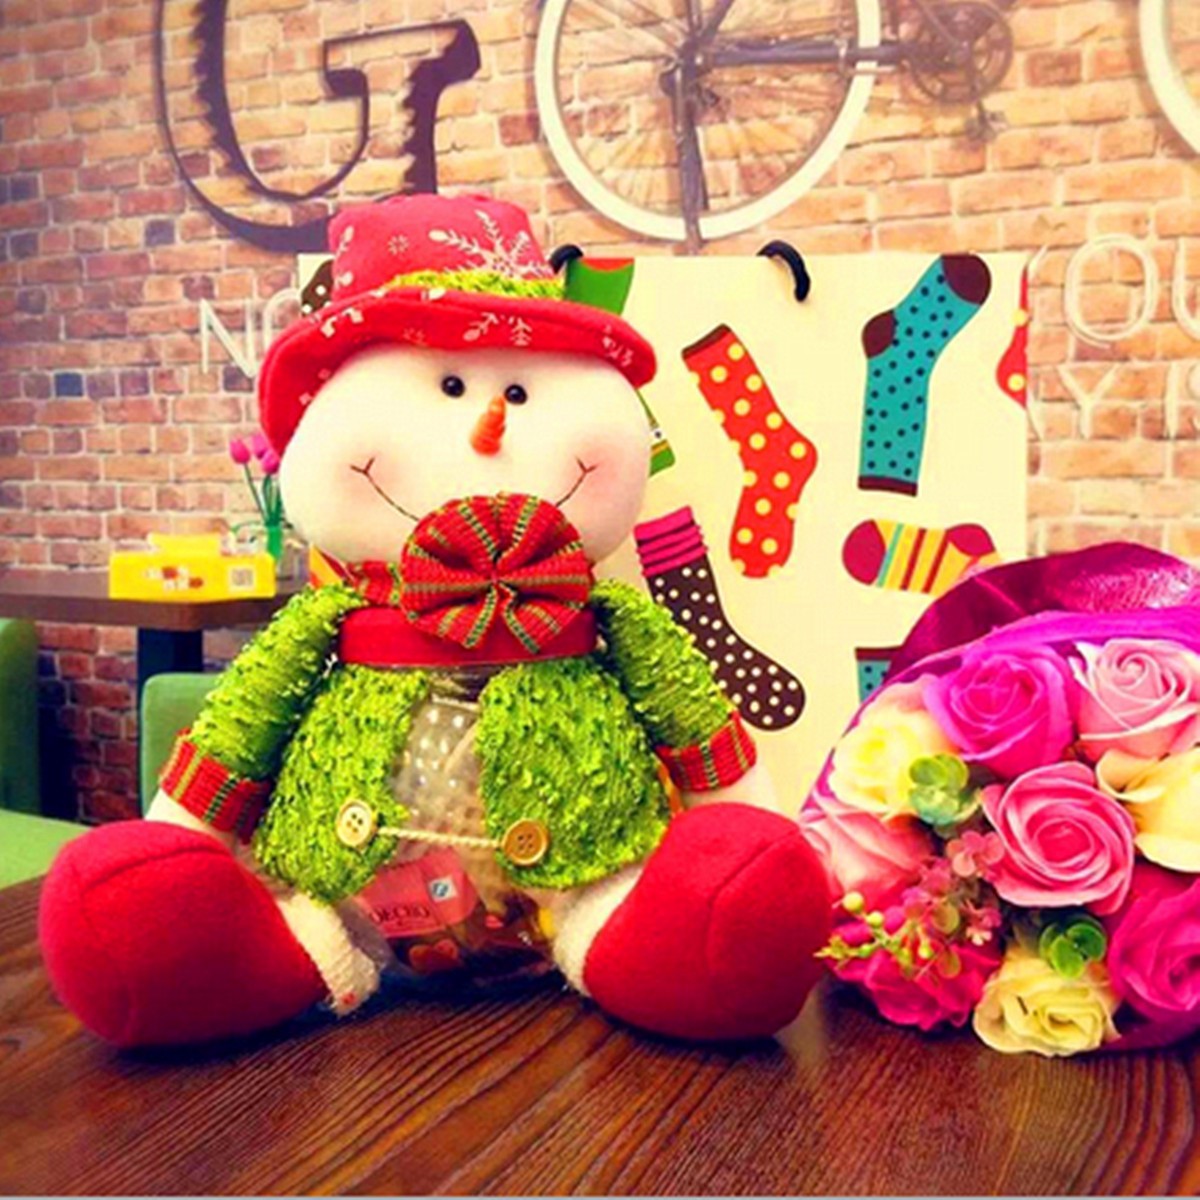 Lovely Snowman Santa Claus Candy Round Jar Bottle Christmas Kid Toy Doll Gift Decor - Photo: 1